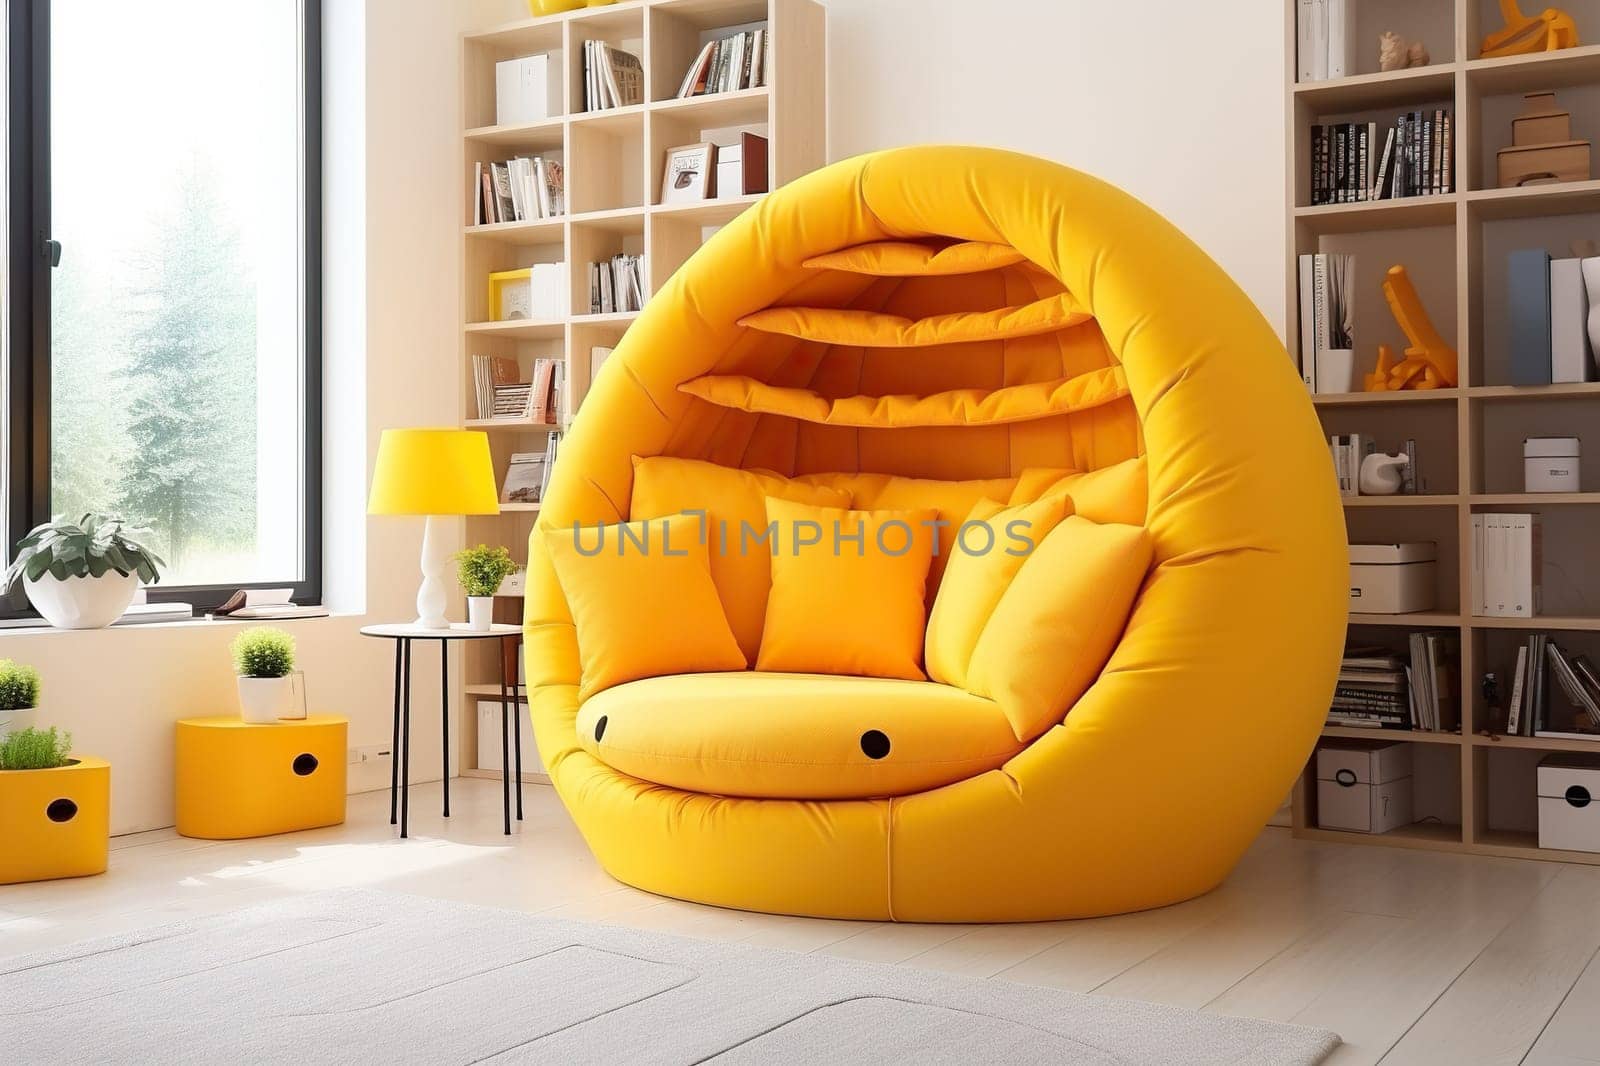 Yellow designer stylish chair in the interior of a bright room. Generated by artificial intelligence by Vovmar